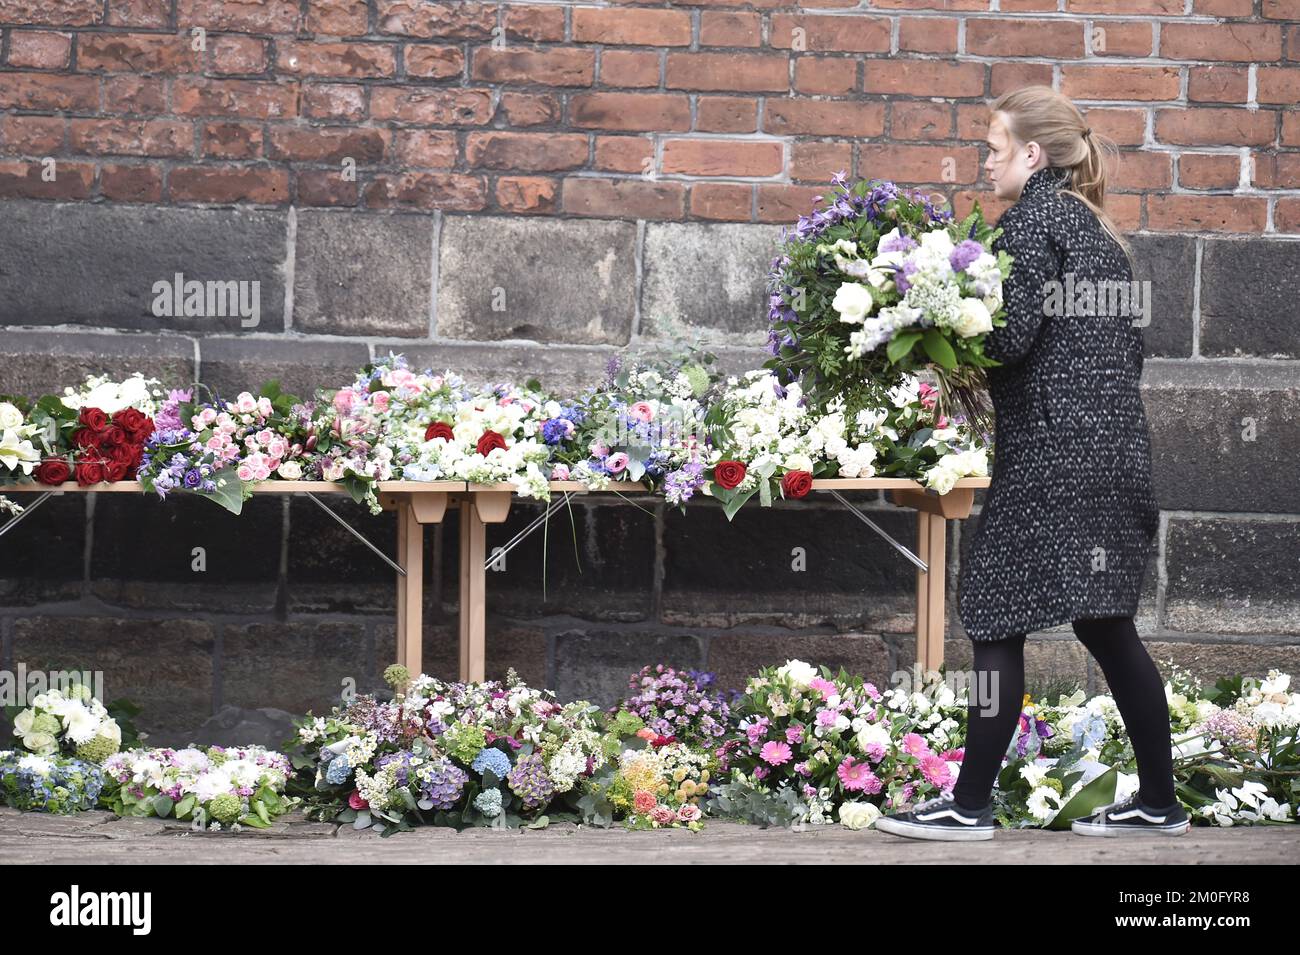 On May 4th 2019. Funeral service for the three children of CEO of clothing brand Bestseller, Anders Holch Povlsen and wife Anne, who were victims of the Sri Lanka terror attack on April 21st. The service was held at Aarhus Cathedral. Among the attending were TRH Crown Prince Frederik, Crown Princess Mary, their four children Prince Christian, Princess Isabella, Prince Vincent and Princess Josephine, Prime Minister Lars Løkke Rasmussen, actor Nikolaj Lie Kaas, and several other cultural and political personas. Stock Photo